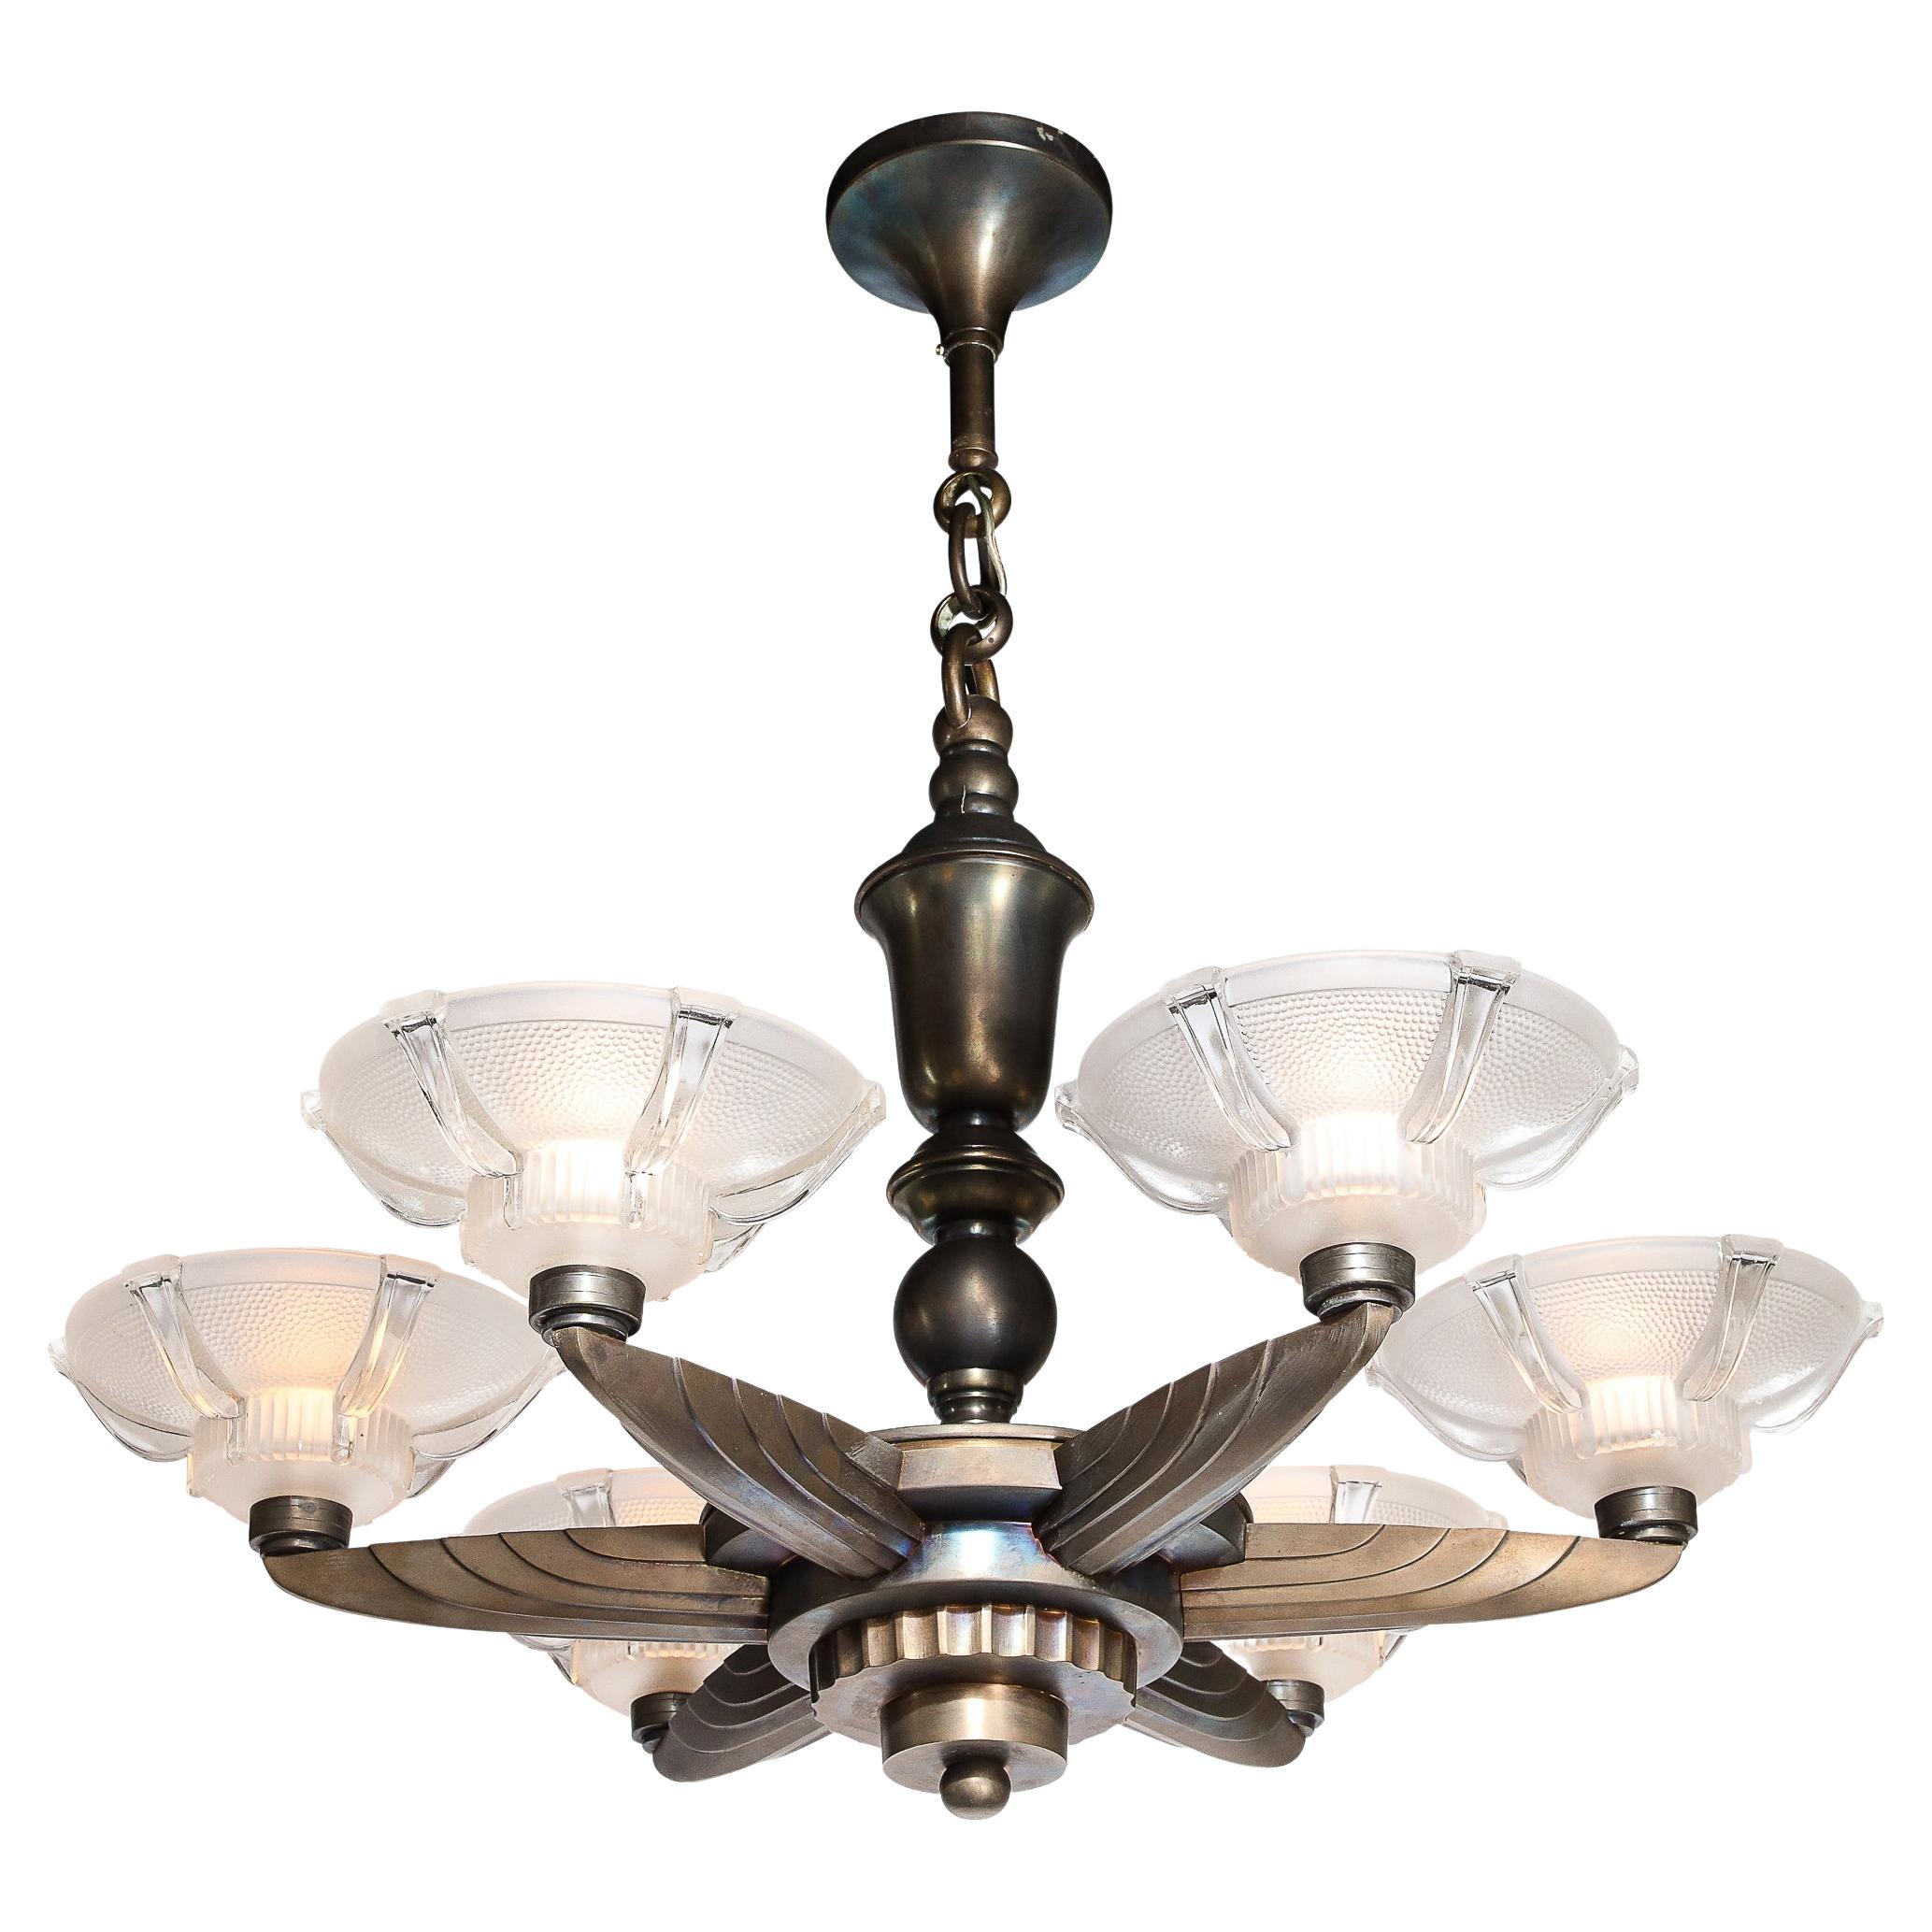 Art Deco Five Arm Bronze and Frosted Glass Chandelier by Petitot